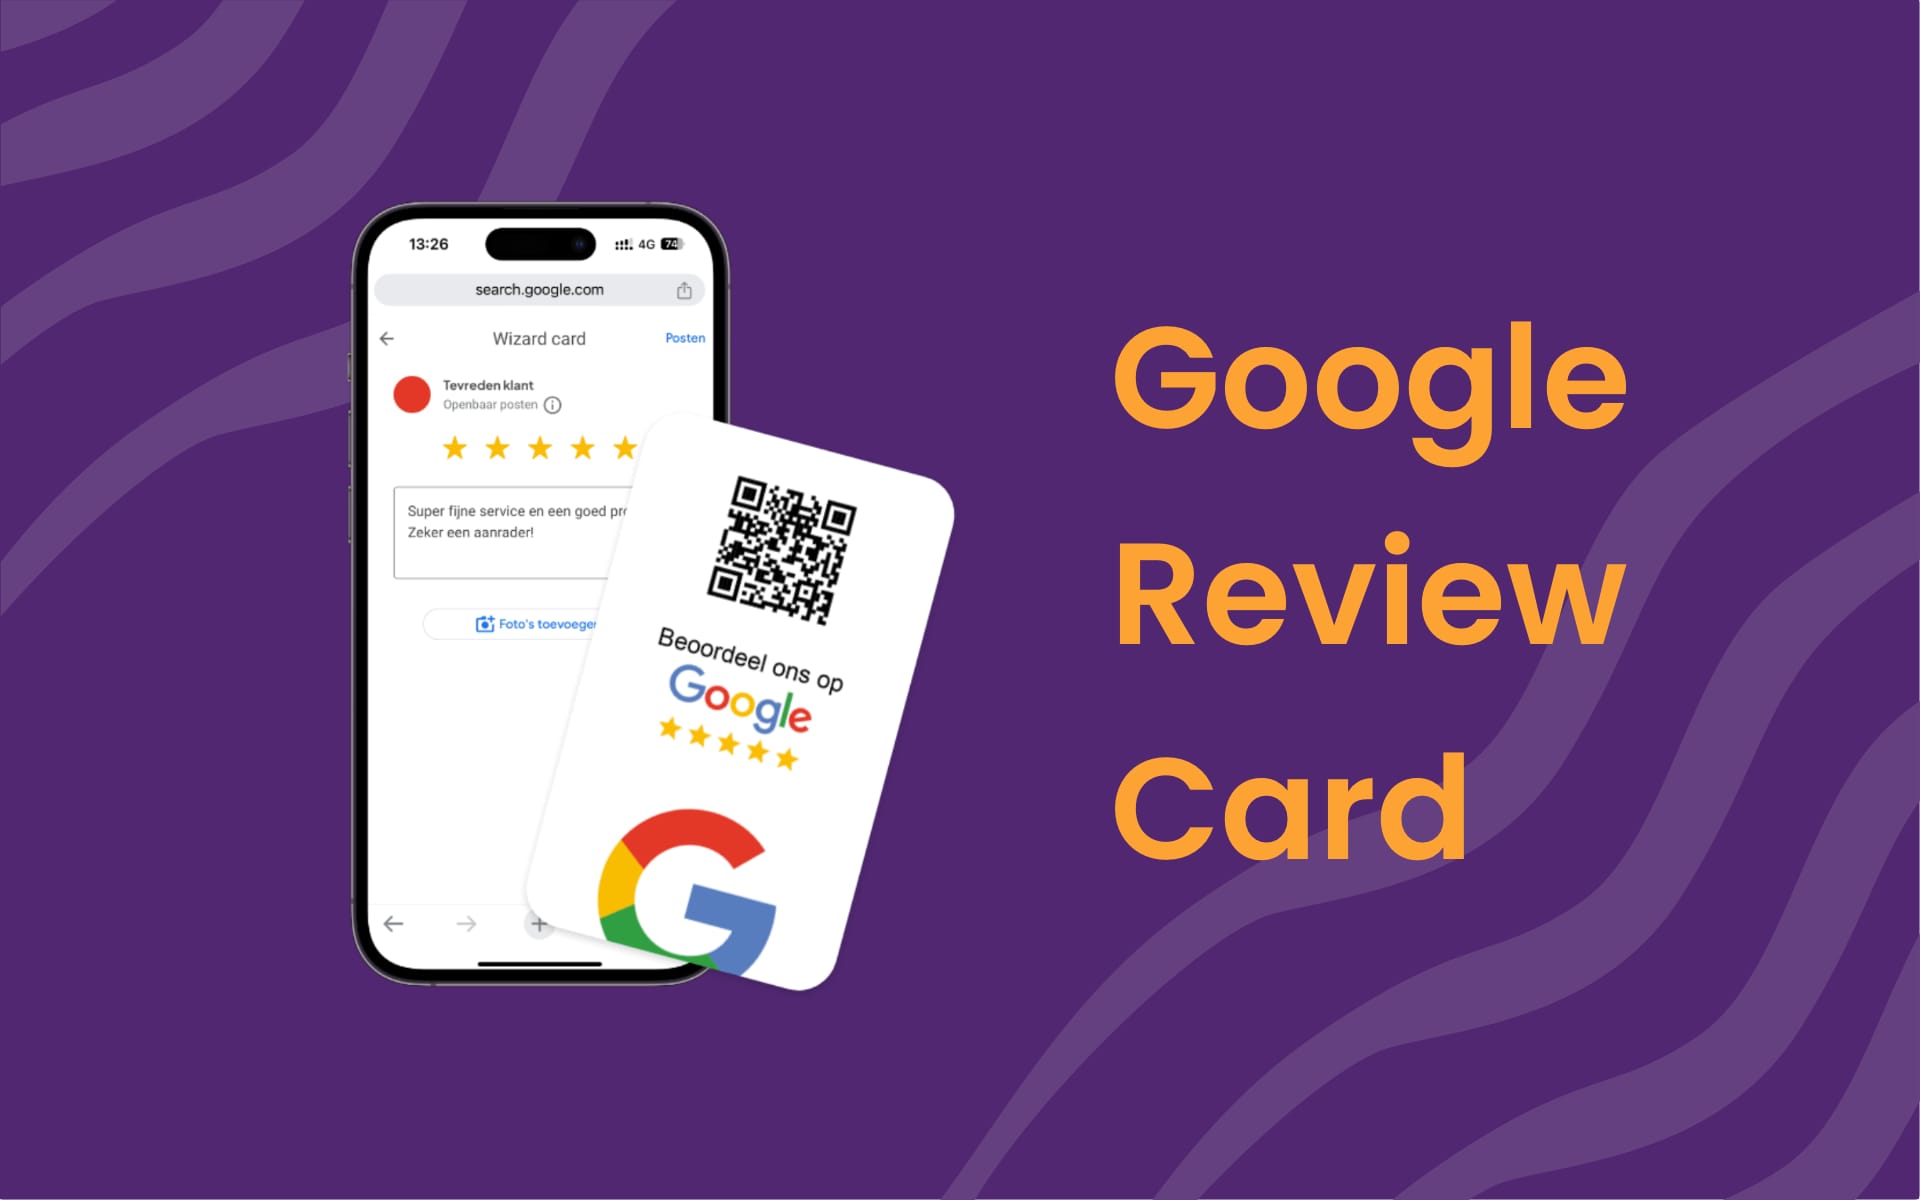 Increase reviews with a Google Review Card